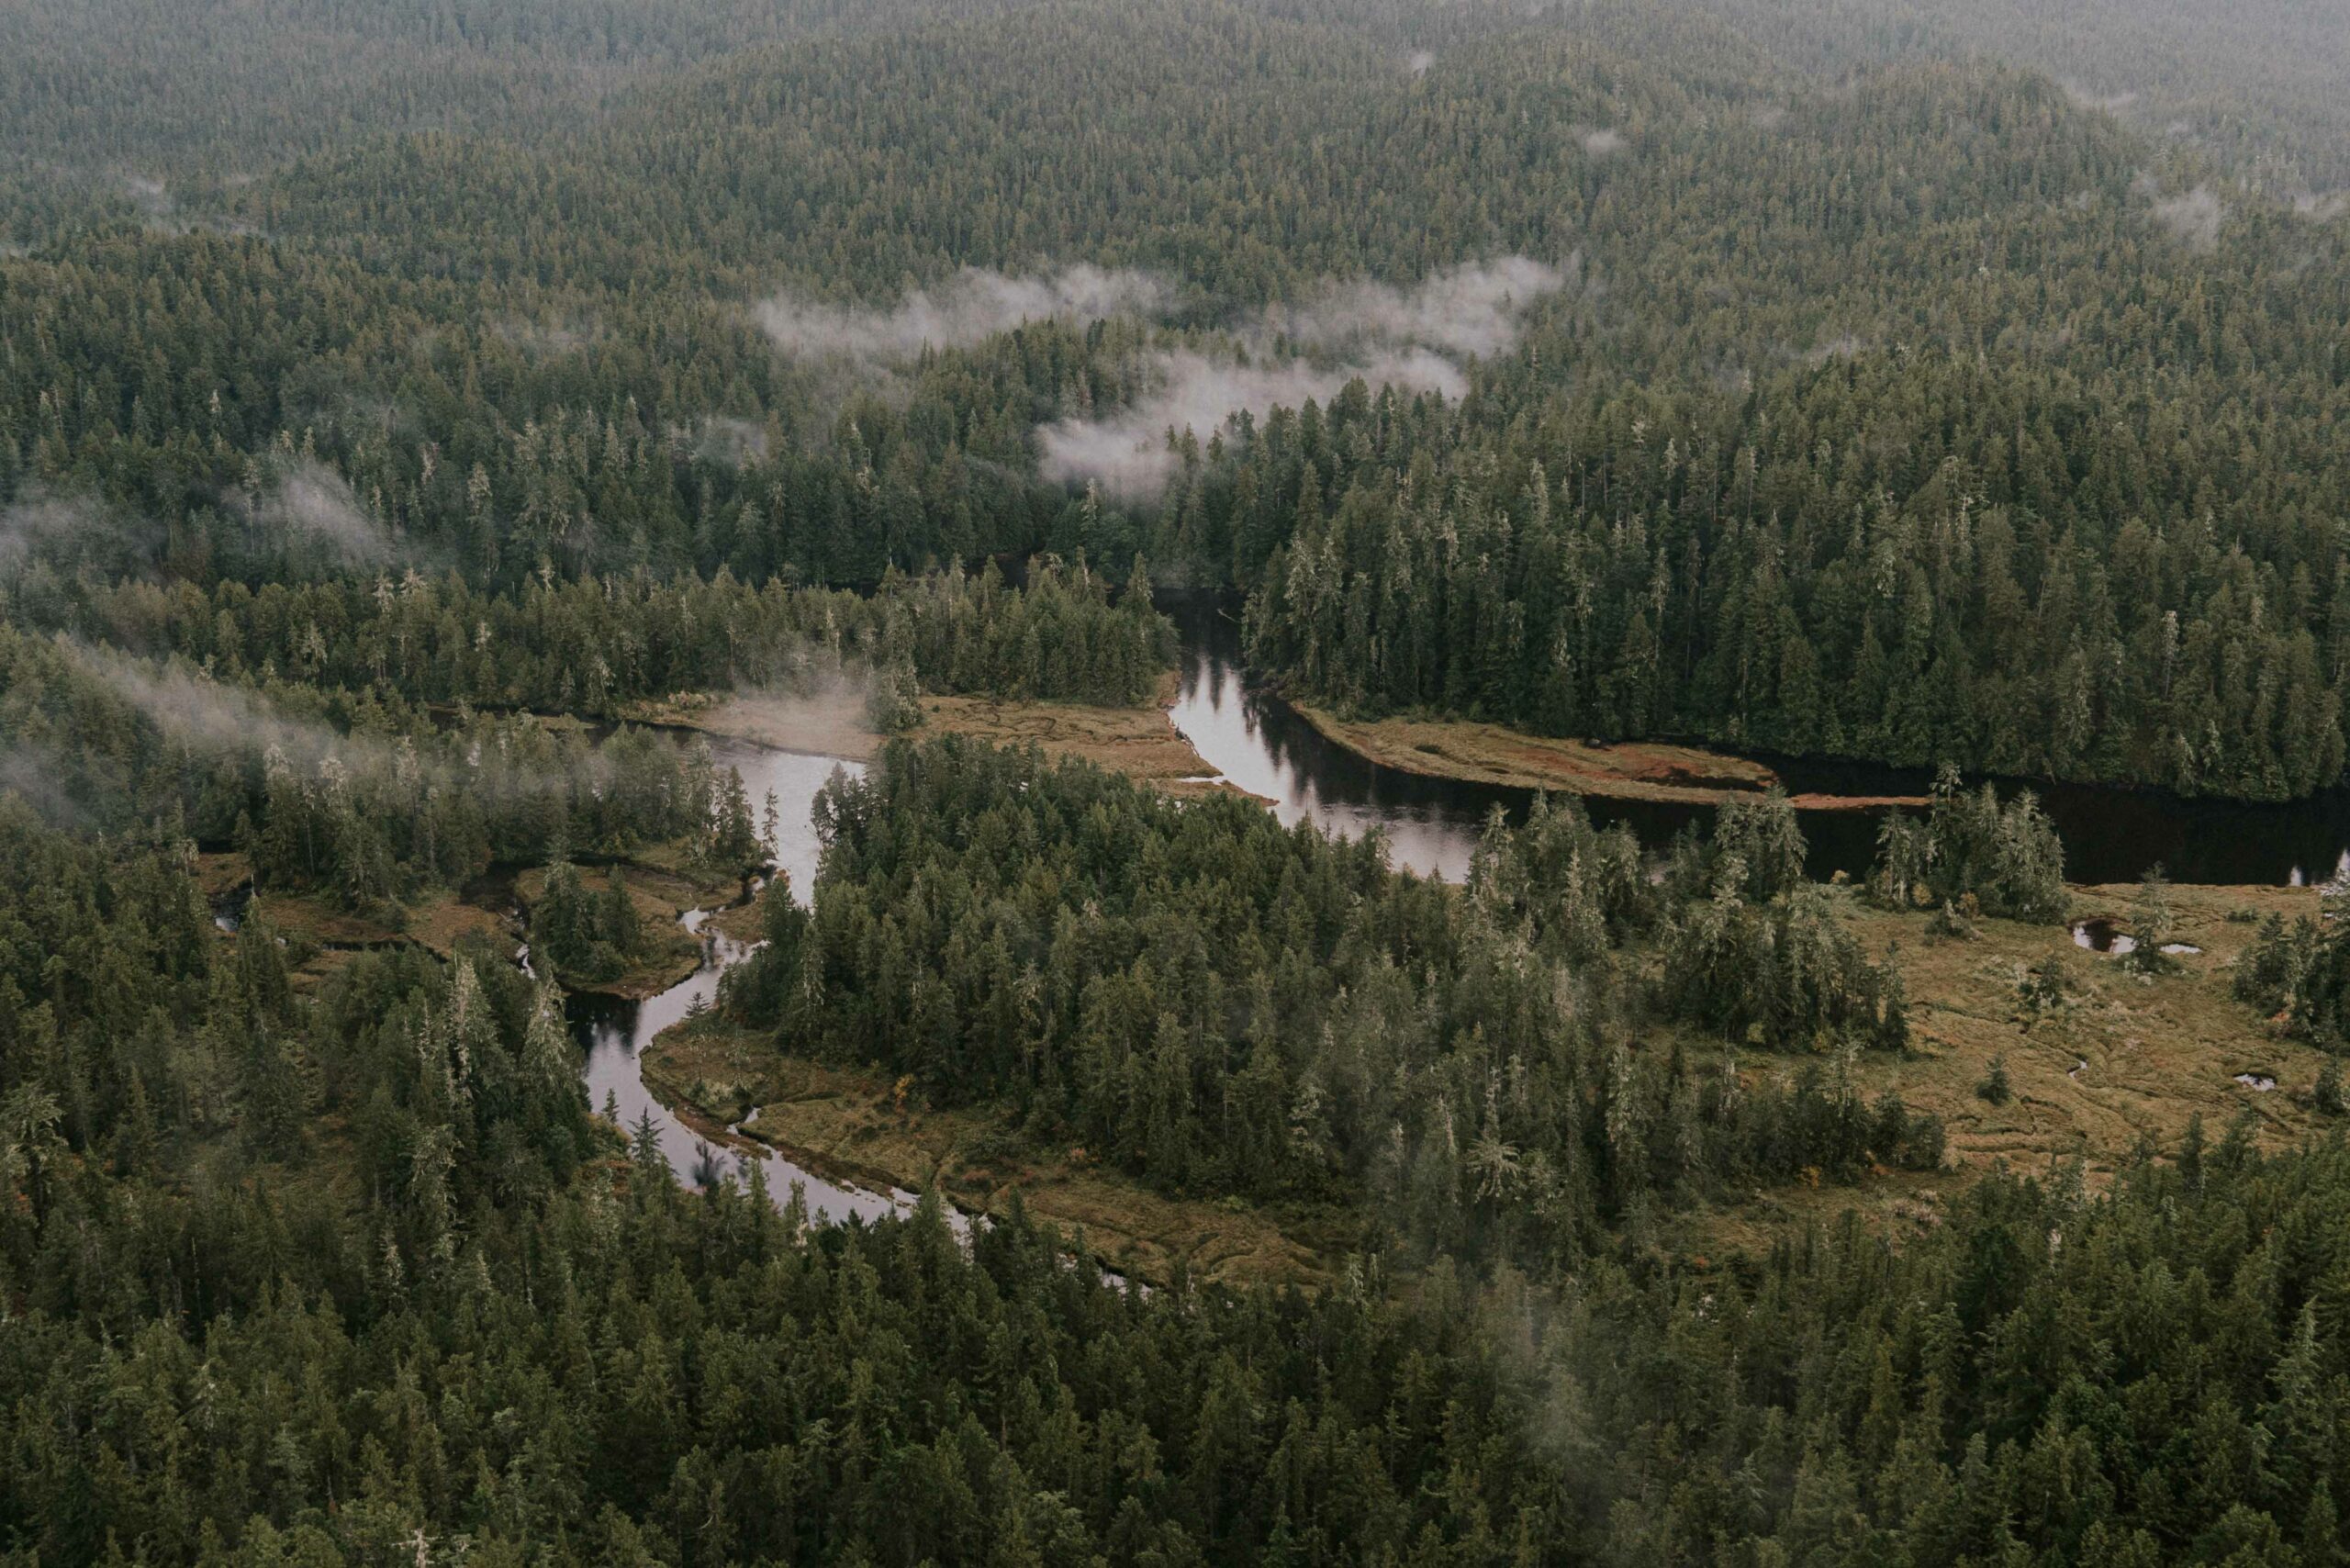 An aerial view of green misty forest and waterways